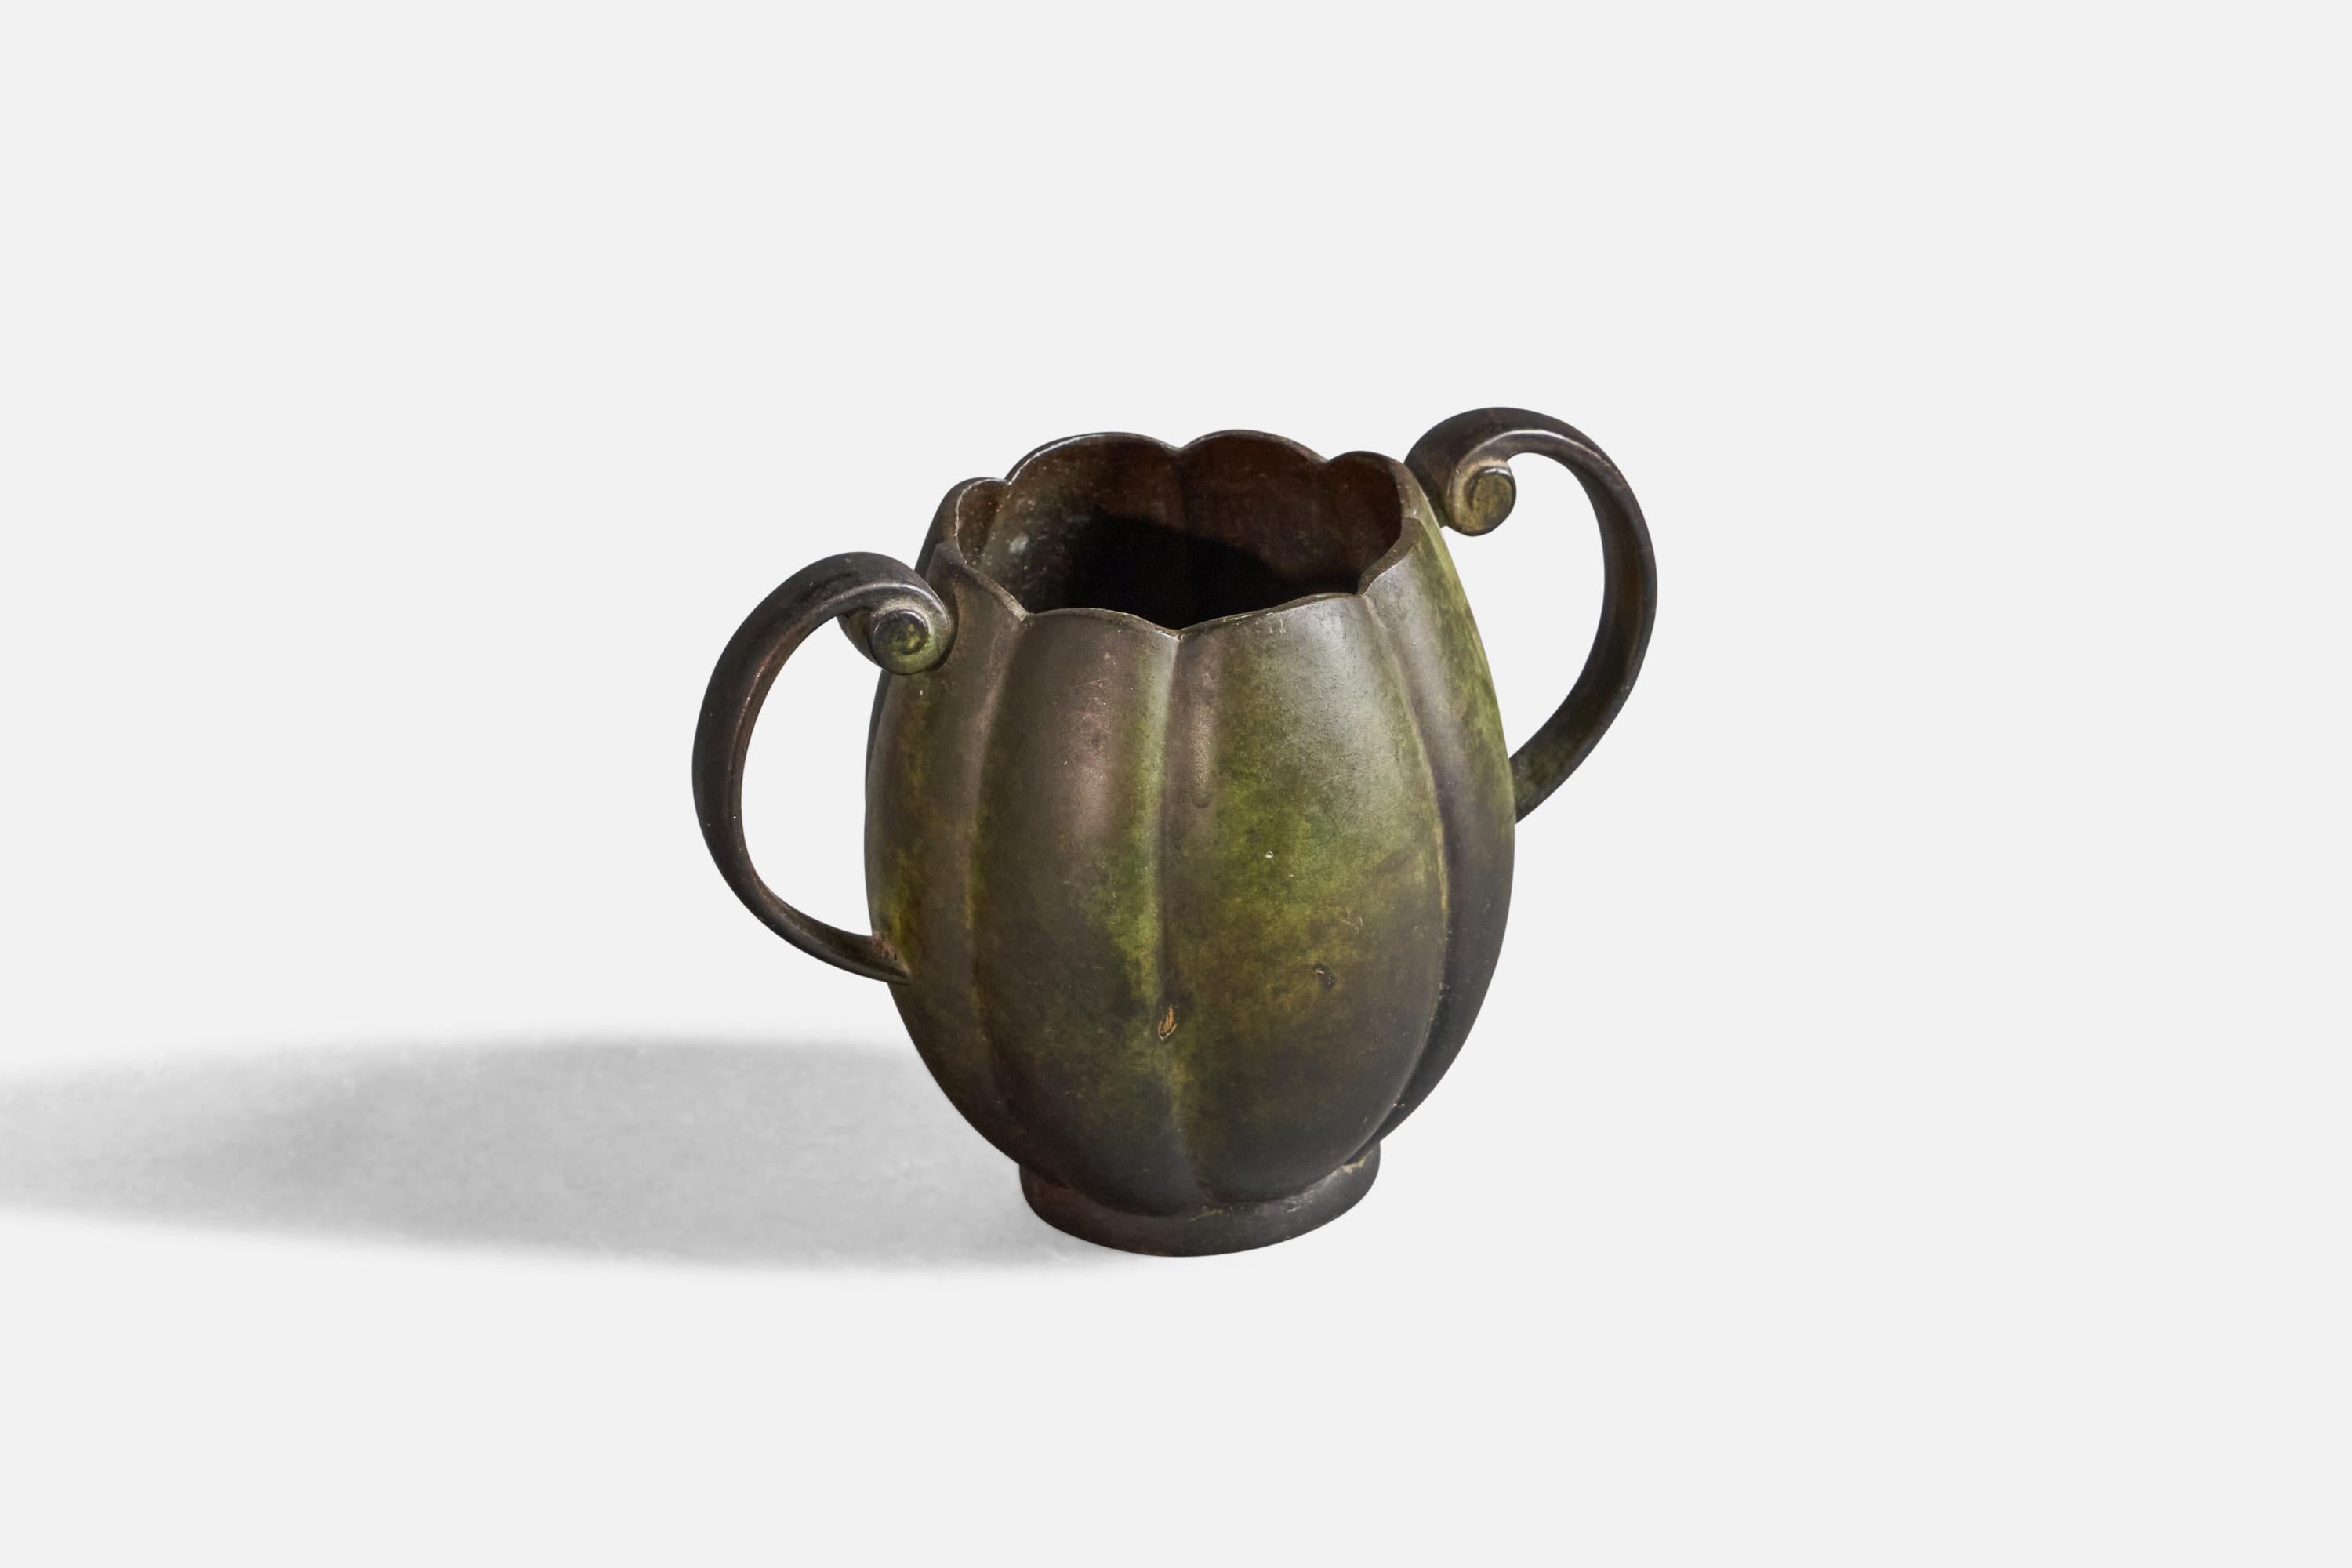 A bronze vase with handles, designed and produced in Denmark, c. 1930s.